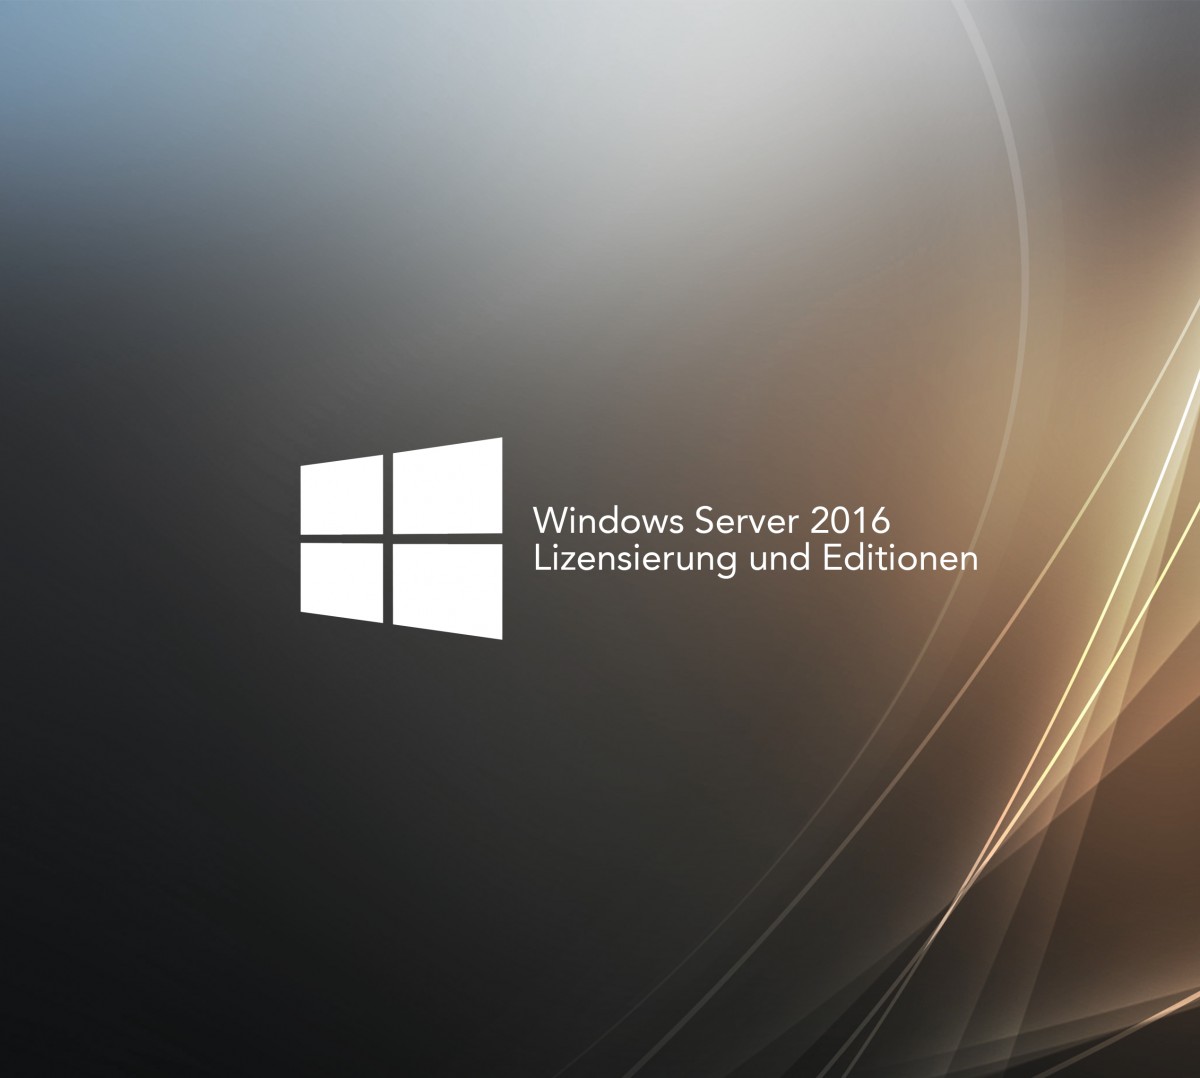 Windows Server 2016 licensing and editions